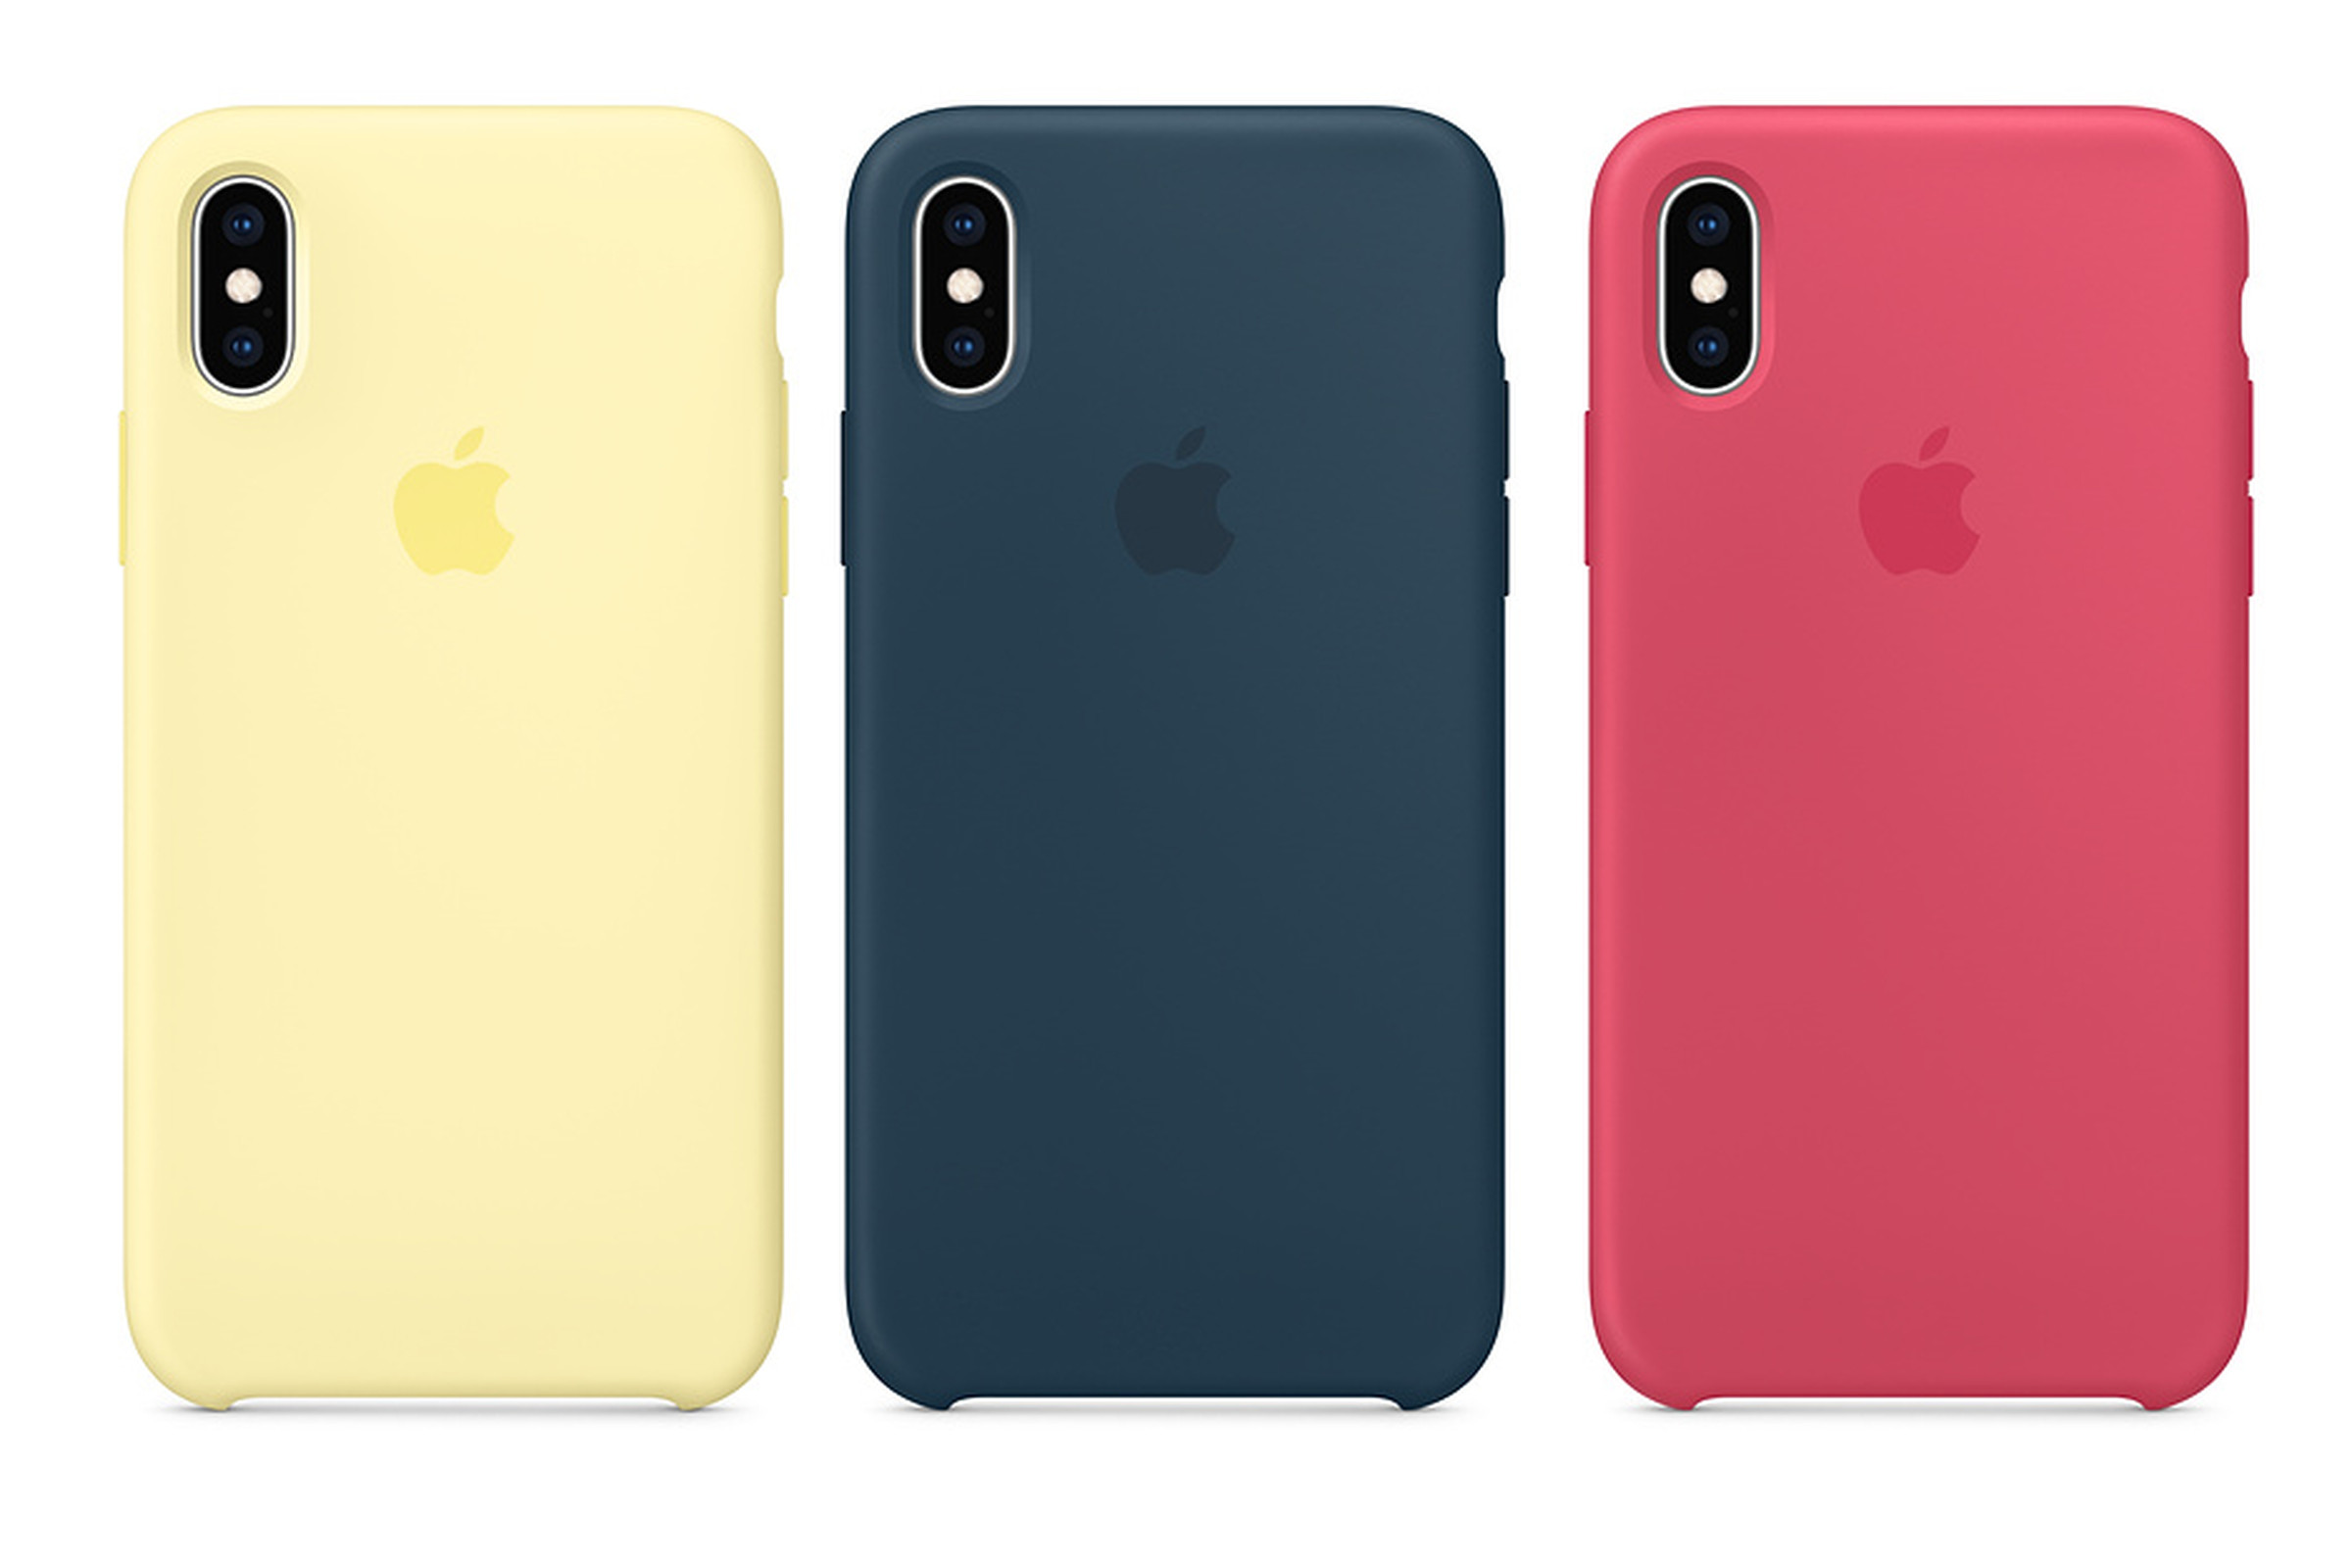 The three new iPhone XS case colors include yellow, green and pink.